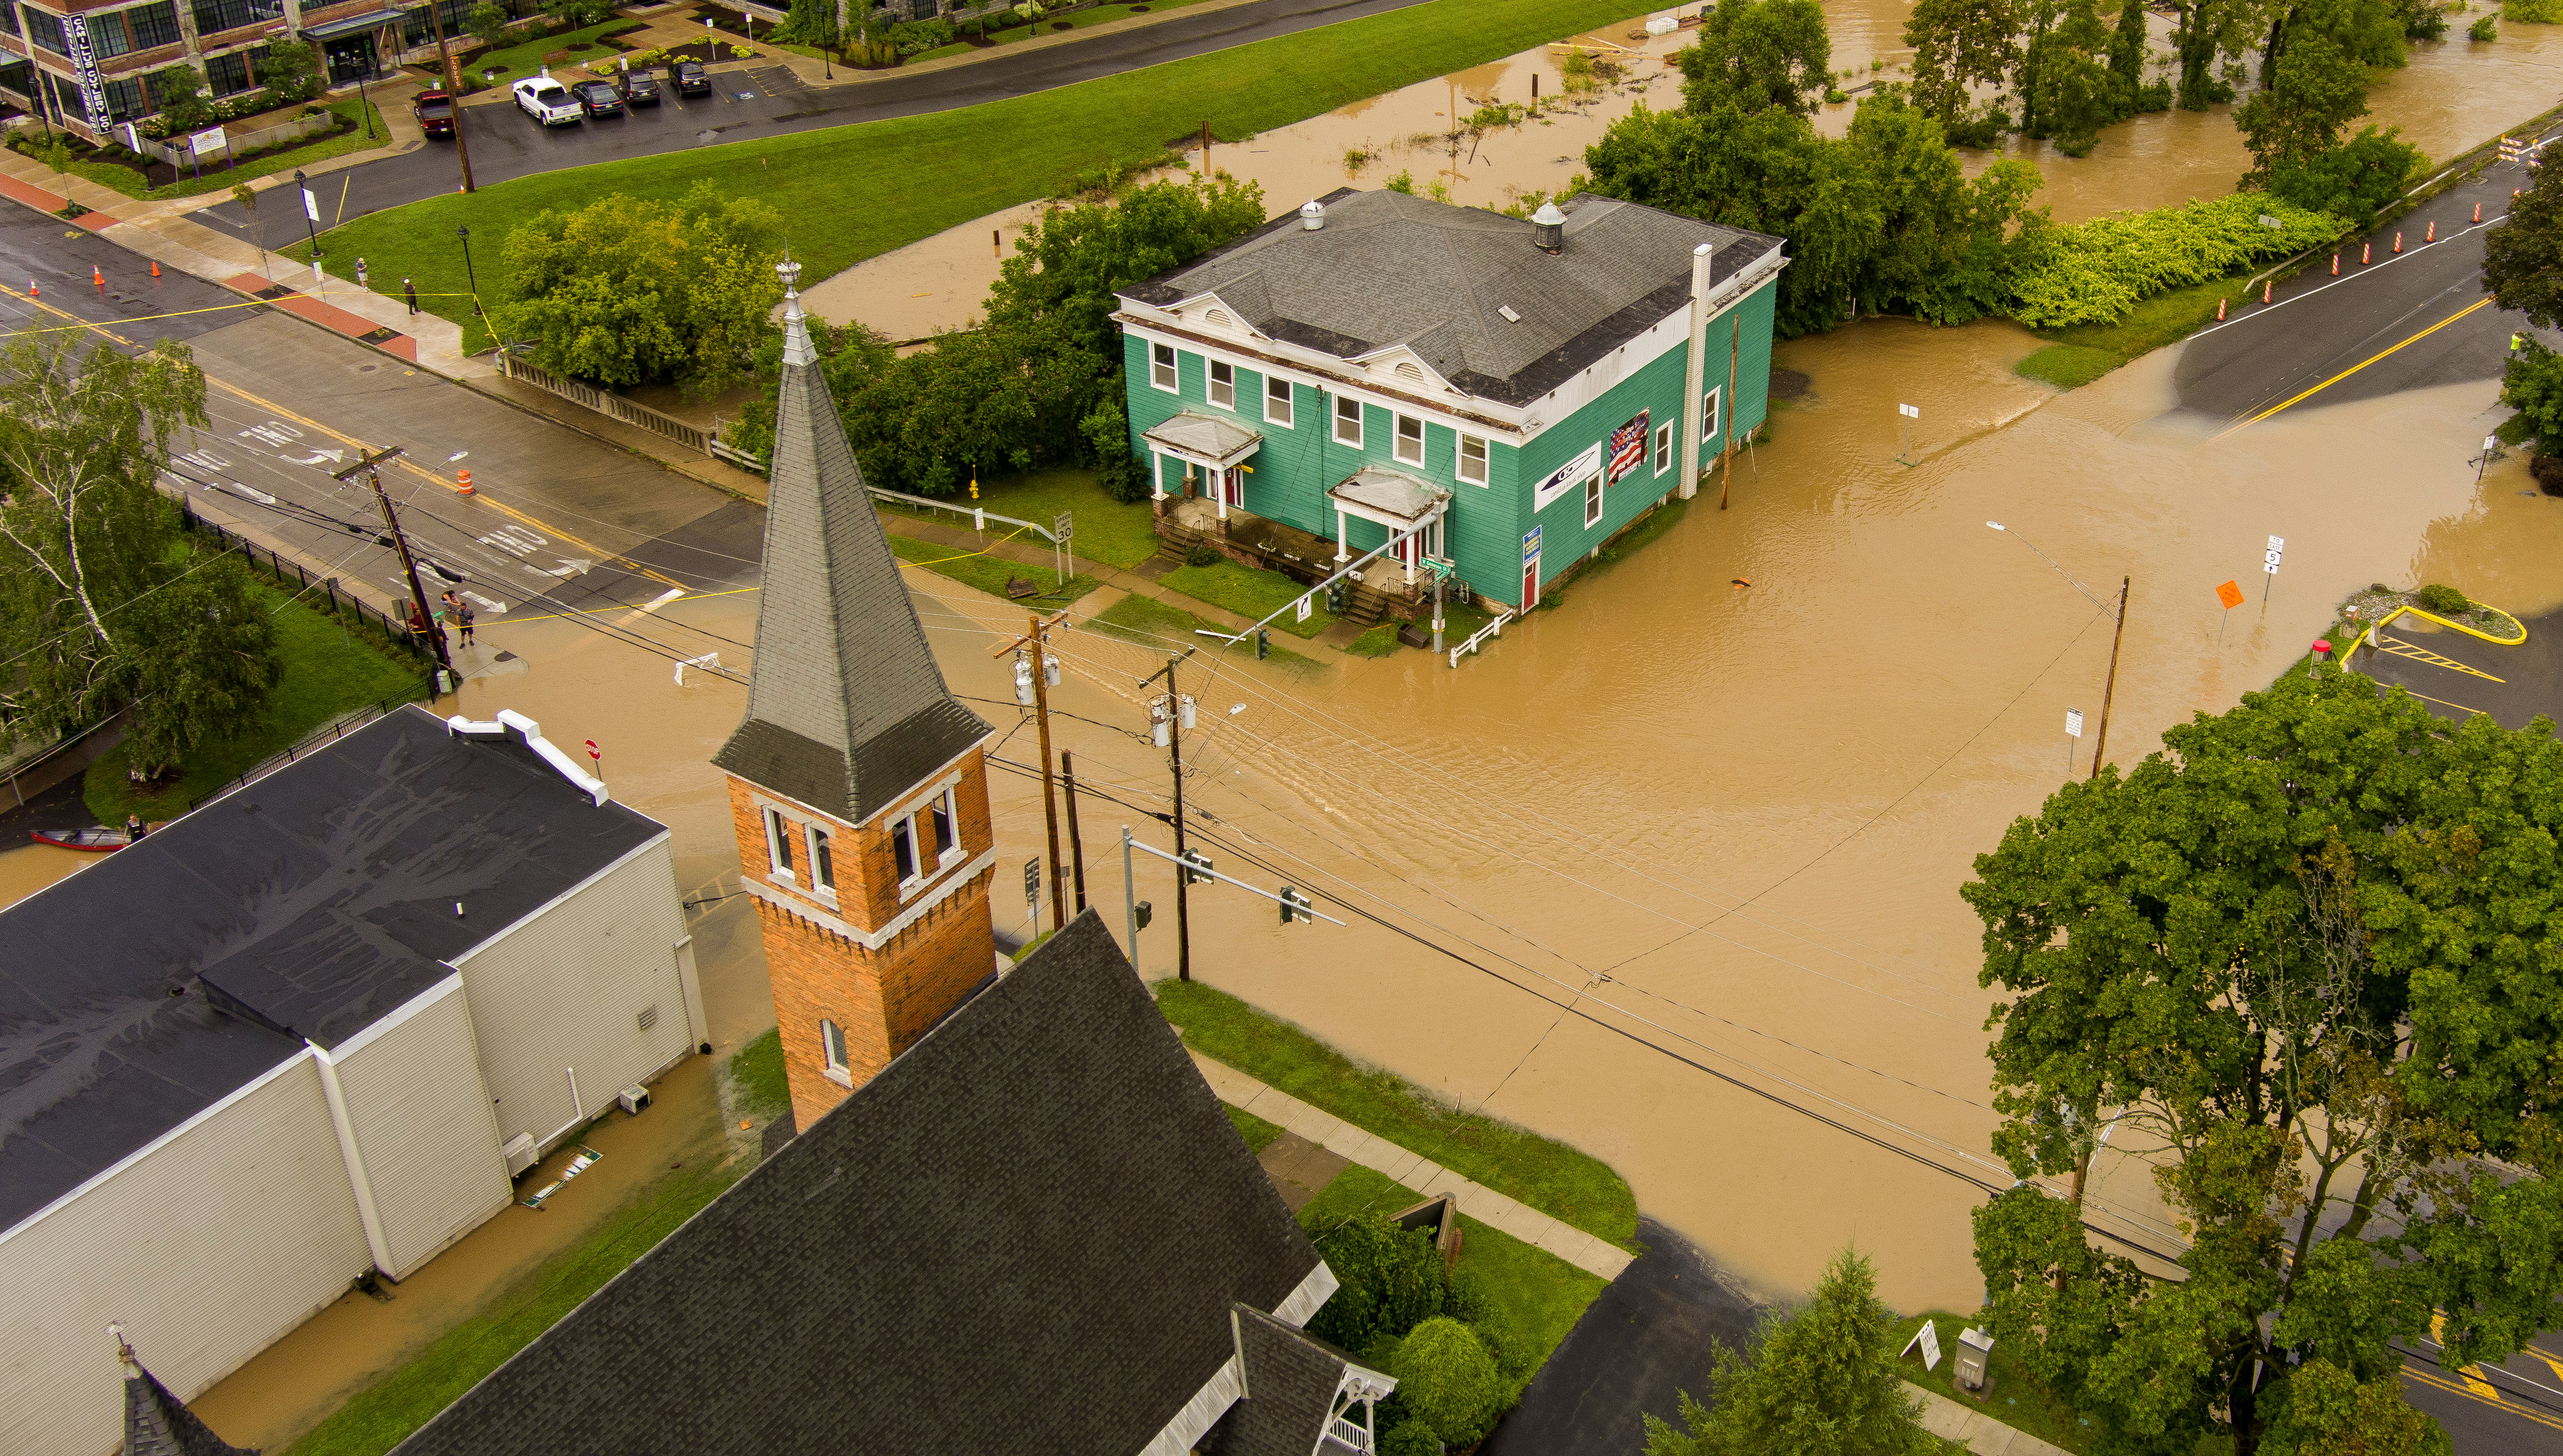 An aerial view of the Village of Camillus where Ninemile Creek flooded streets August 19, 2021, after heavy rainfall.